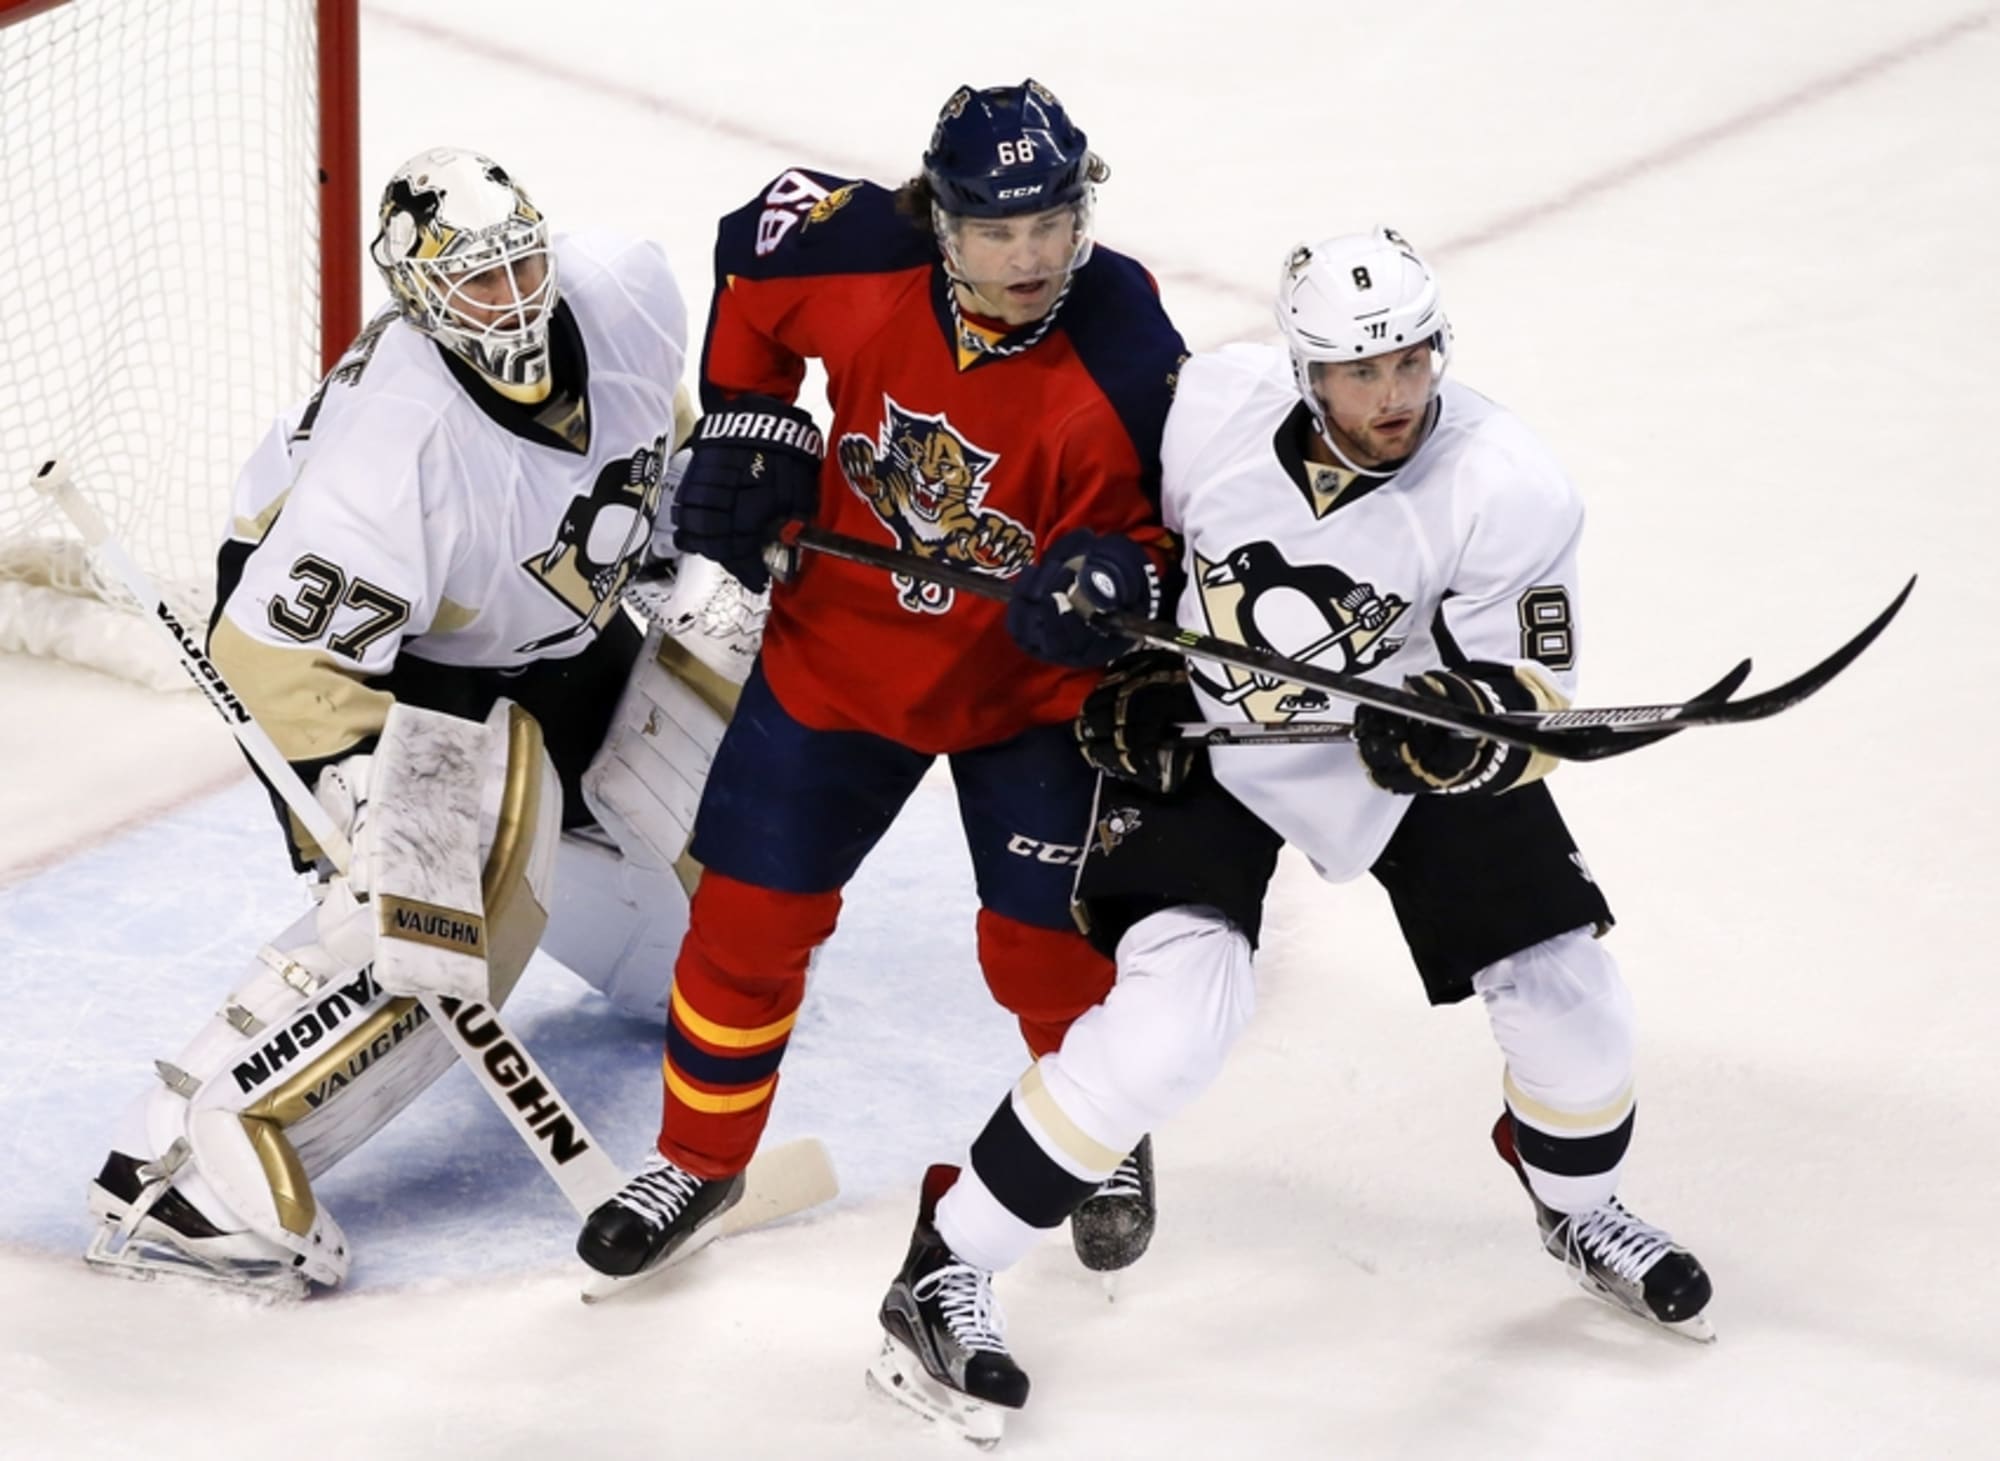 Ageless Jaromir Jagr starts yet another season with Panthers